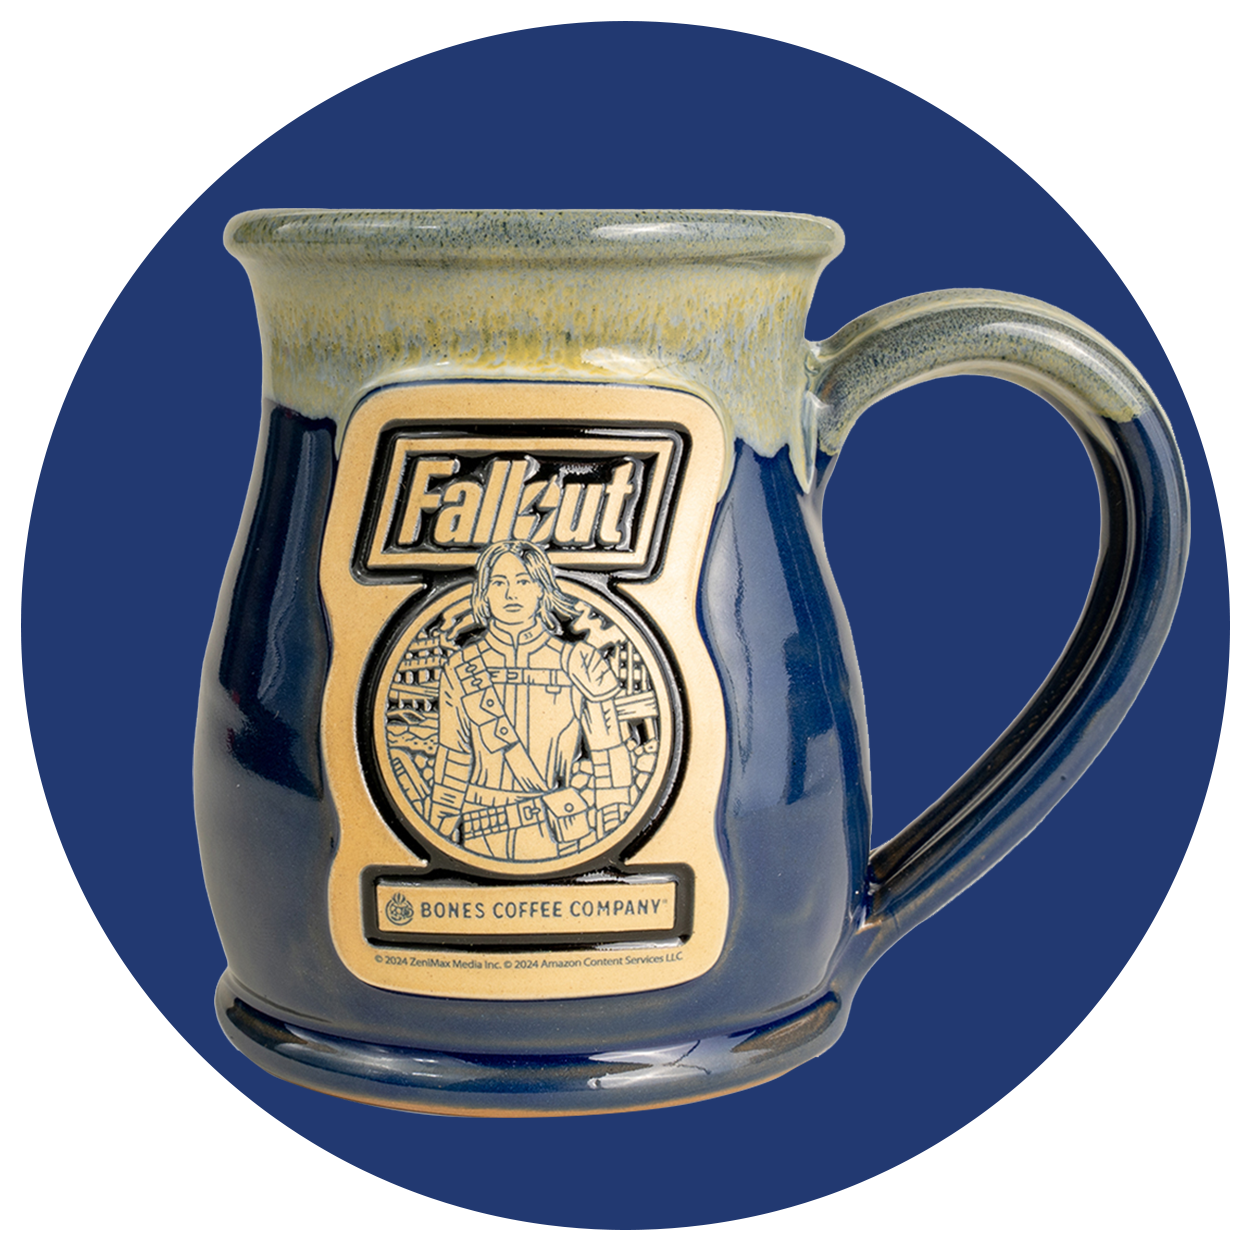 The front of the Bones Coffee Company Lucy hand thrown mug with the Atomic Apple art on the golden medallion. It is inspired by Zenimax and Amazon’s Fallout show. The mug is powder blue colored with a white and yellow glaze on top. A dark blue circle is behind it.